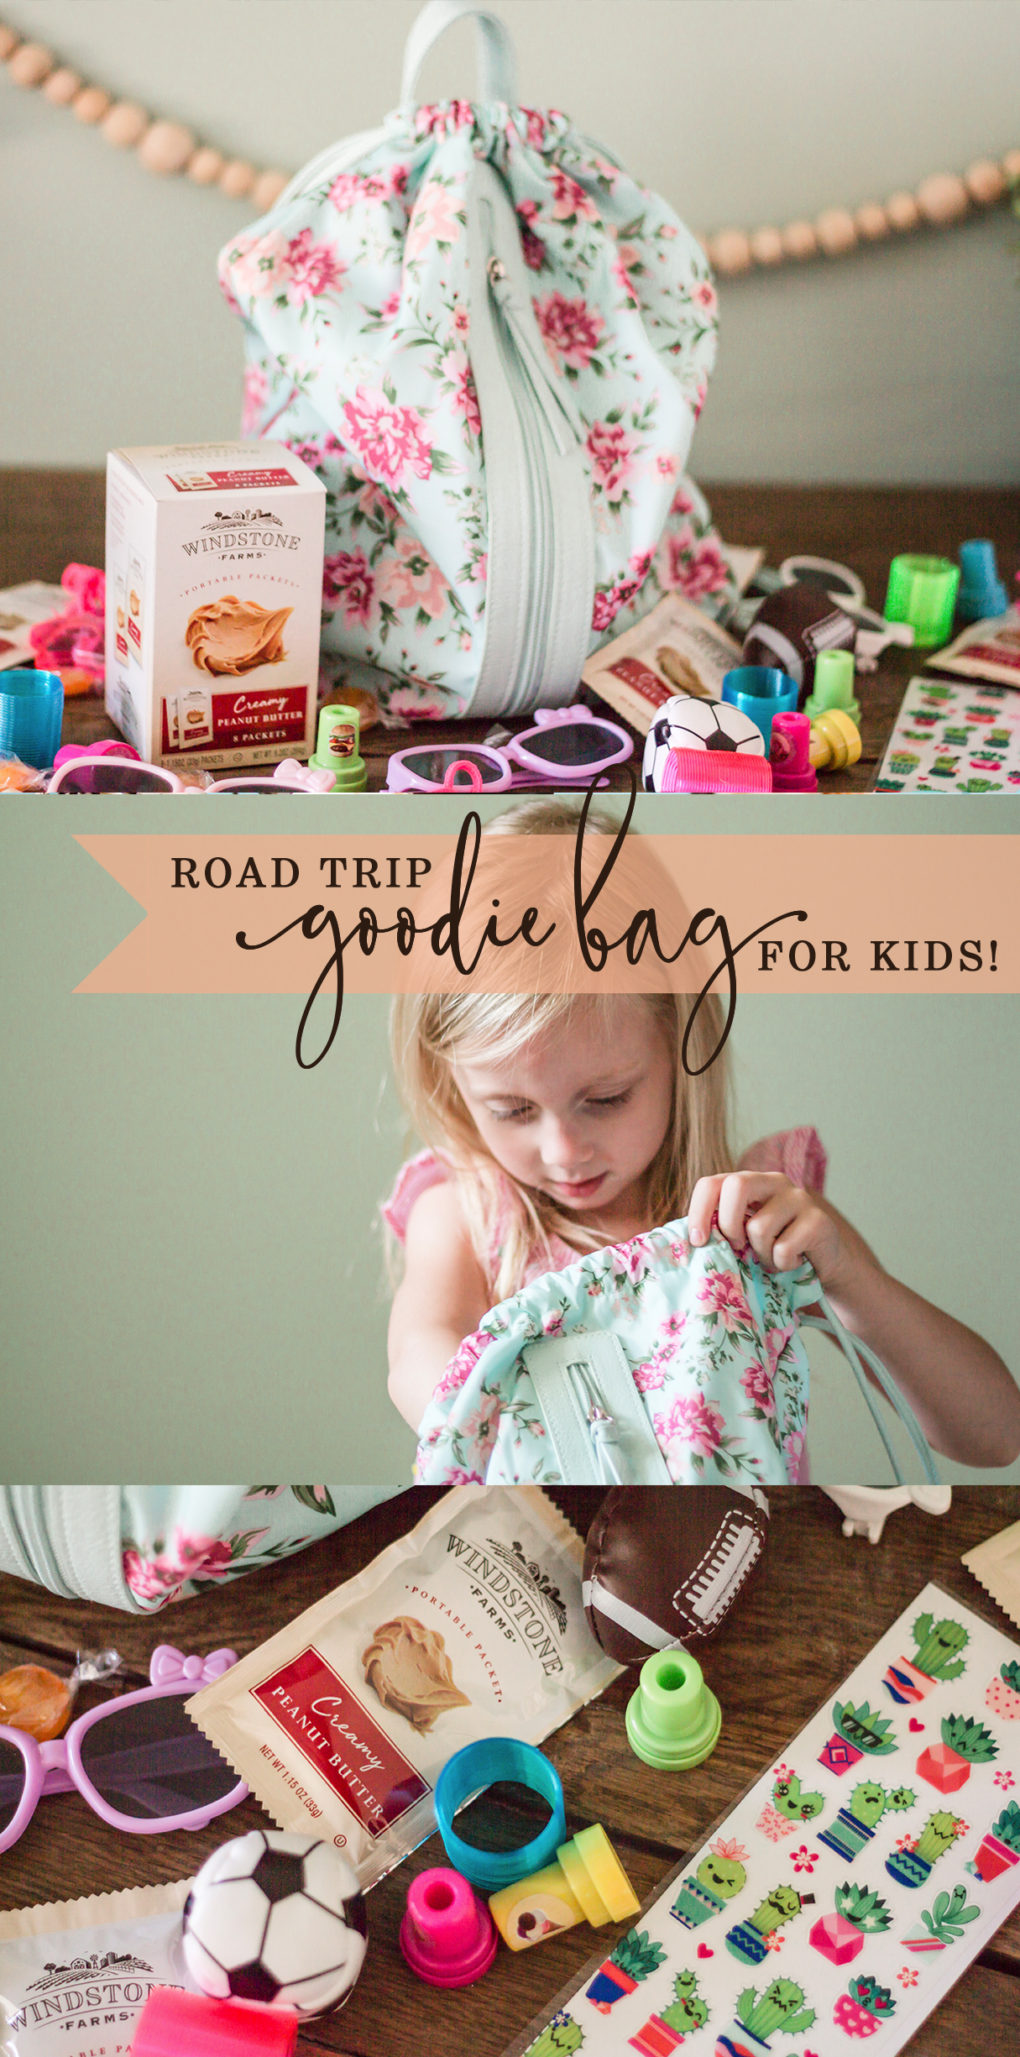 Road Trip Goodie Bag for Kids! An easy idea of how to entertain your children on a long car ride.